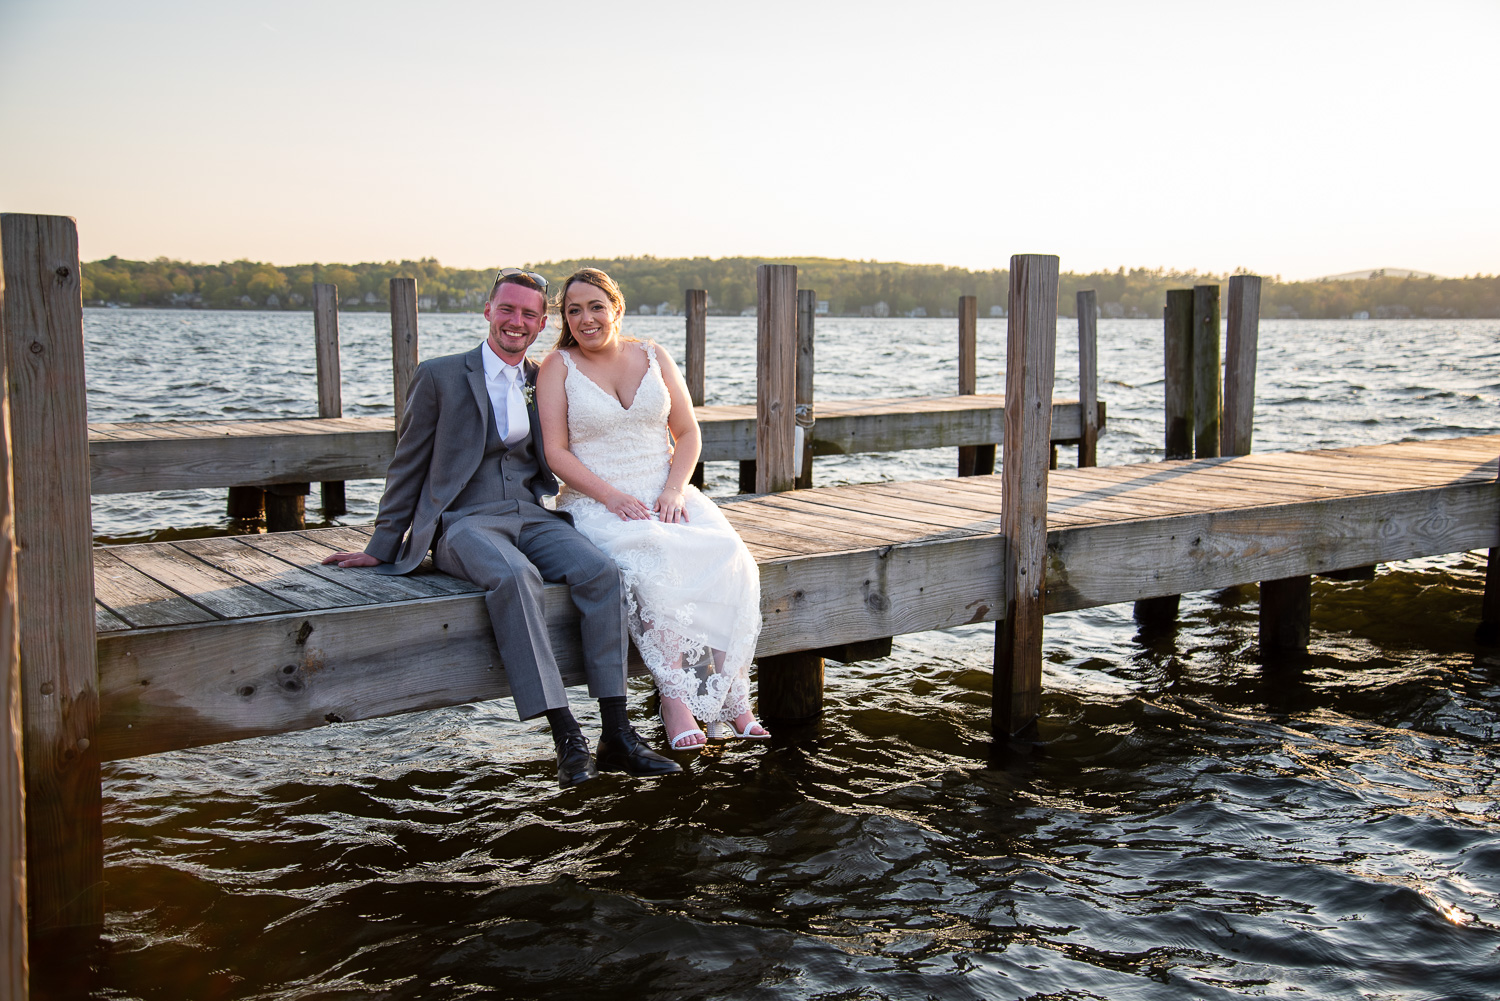 Bride and groom sitting on the edge of the dock with their feet hanging over the water at the lakeside wedding